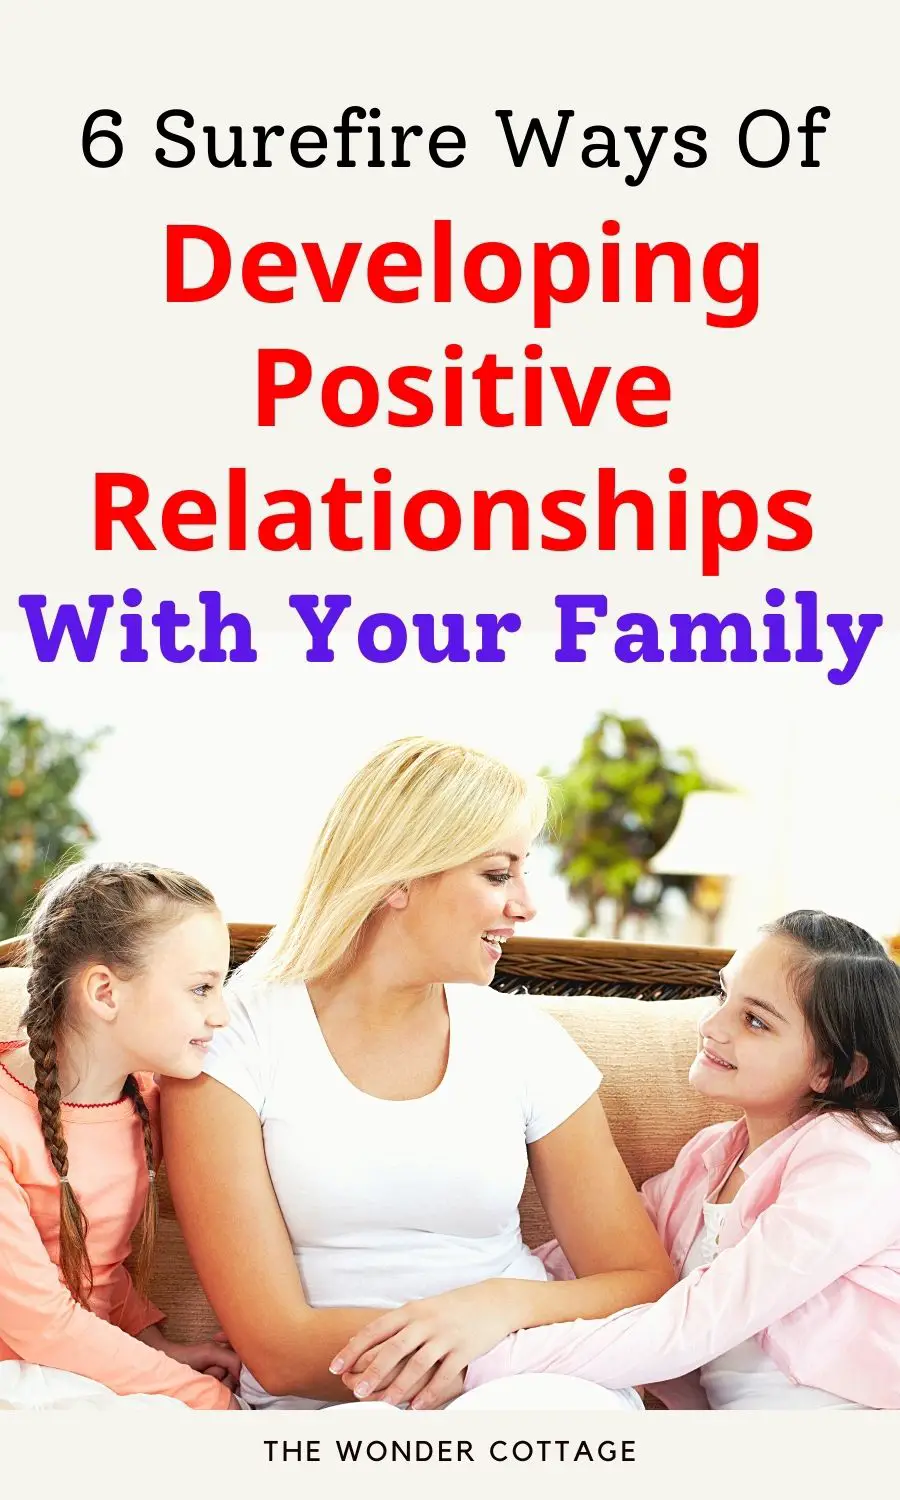 6 Surefire Ways Of Developing Positive Relationships With Your Family